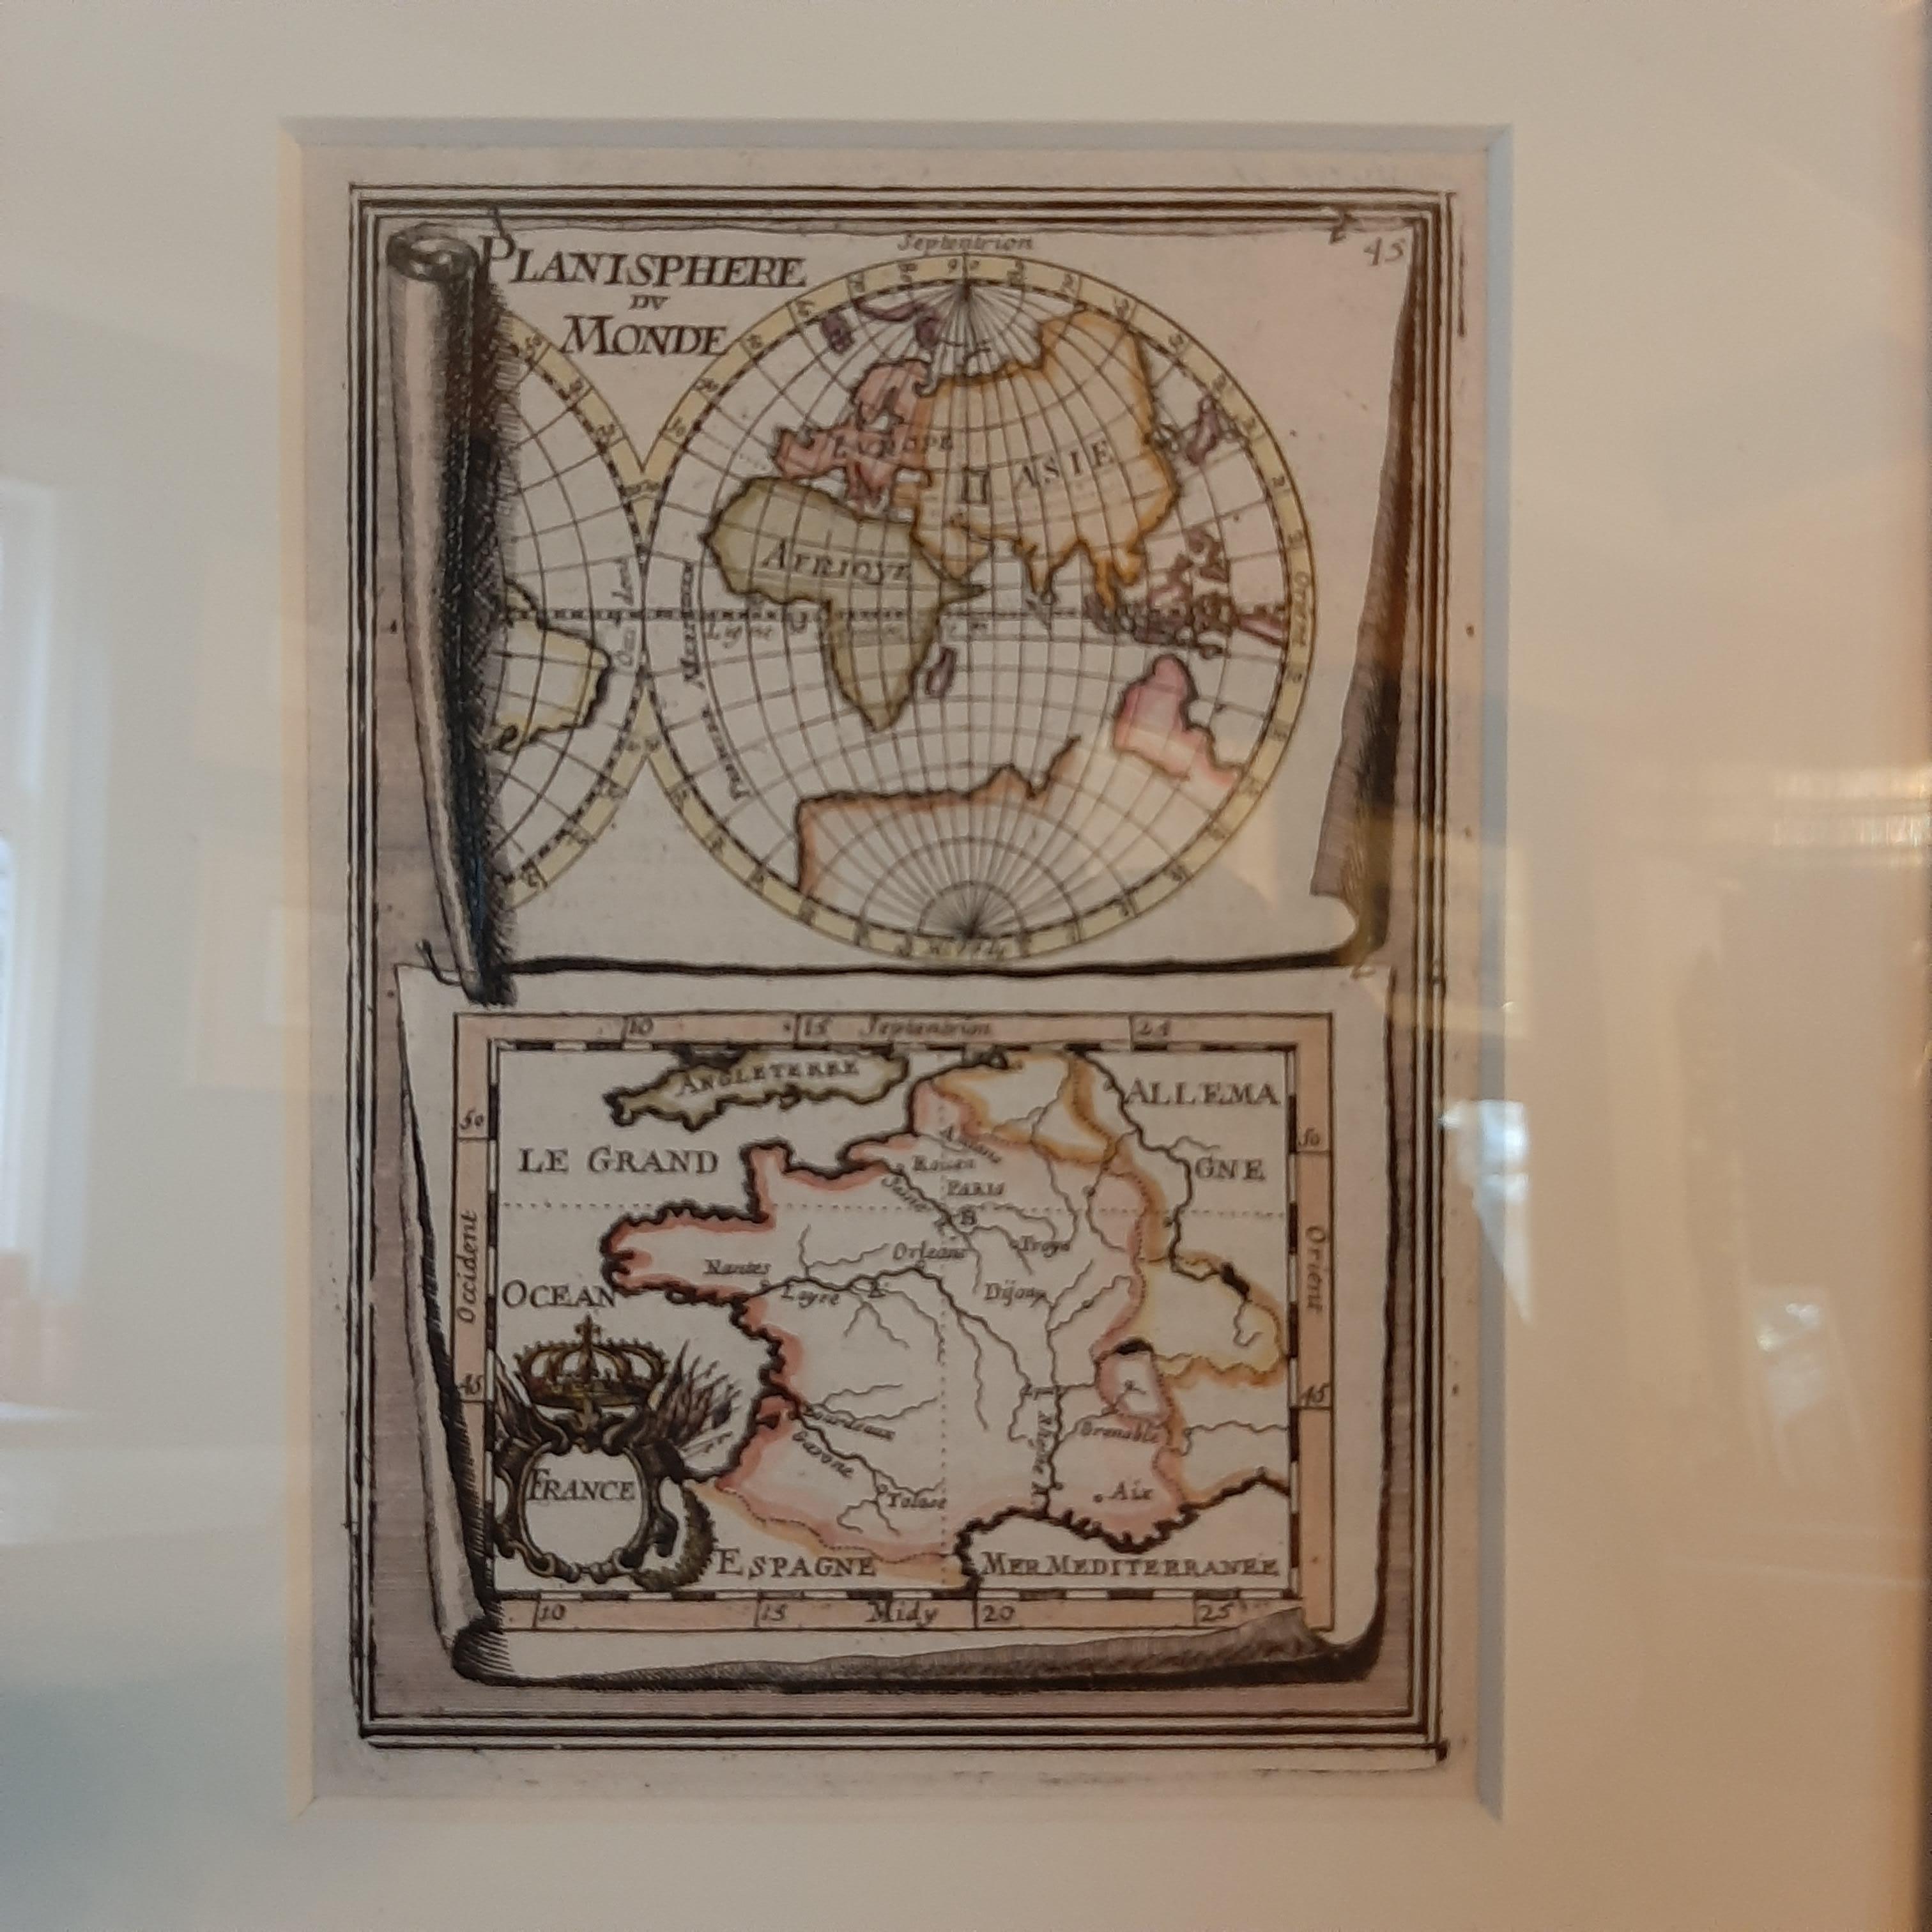 Antique map titled 'Planisphere du Monde - France'. Two miniature maps on one sheet. The upper map shows a hemisphere of the Old World. The lower map shows France. This map originates from 'Description de l'Univers' by A.M. Mallet. Published circa